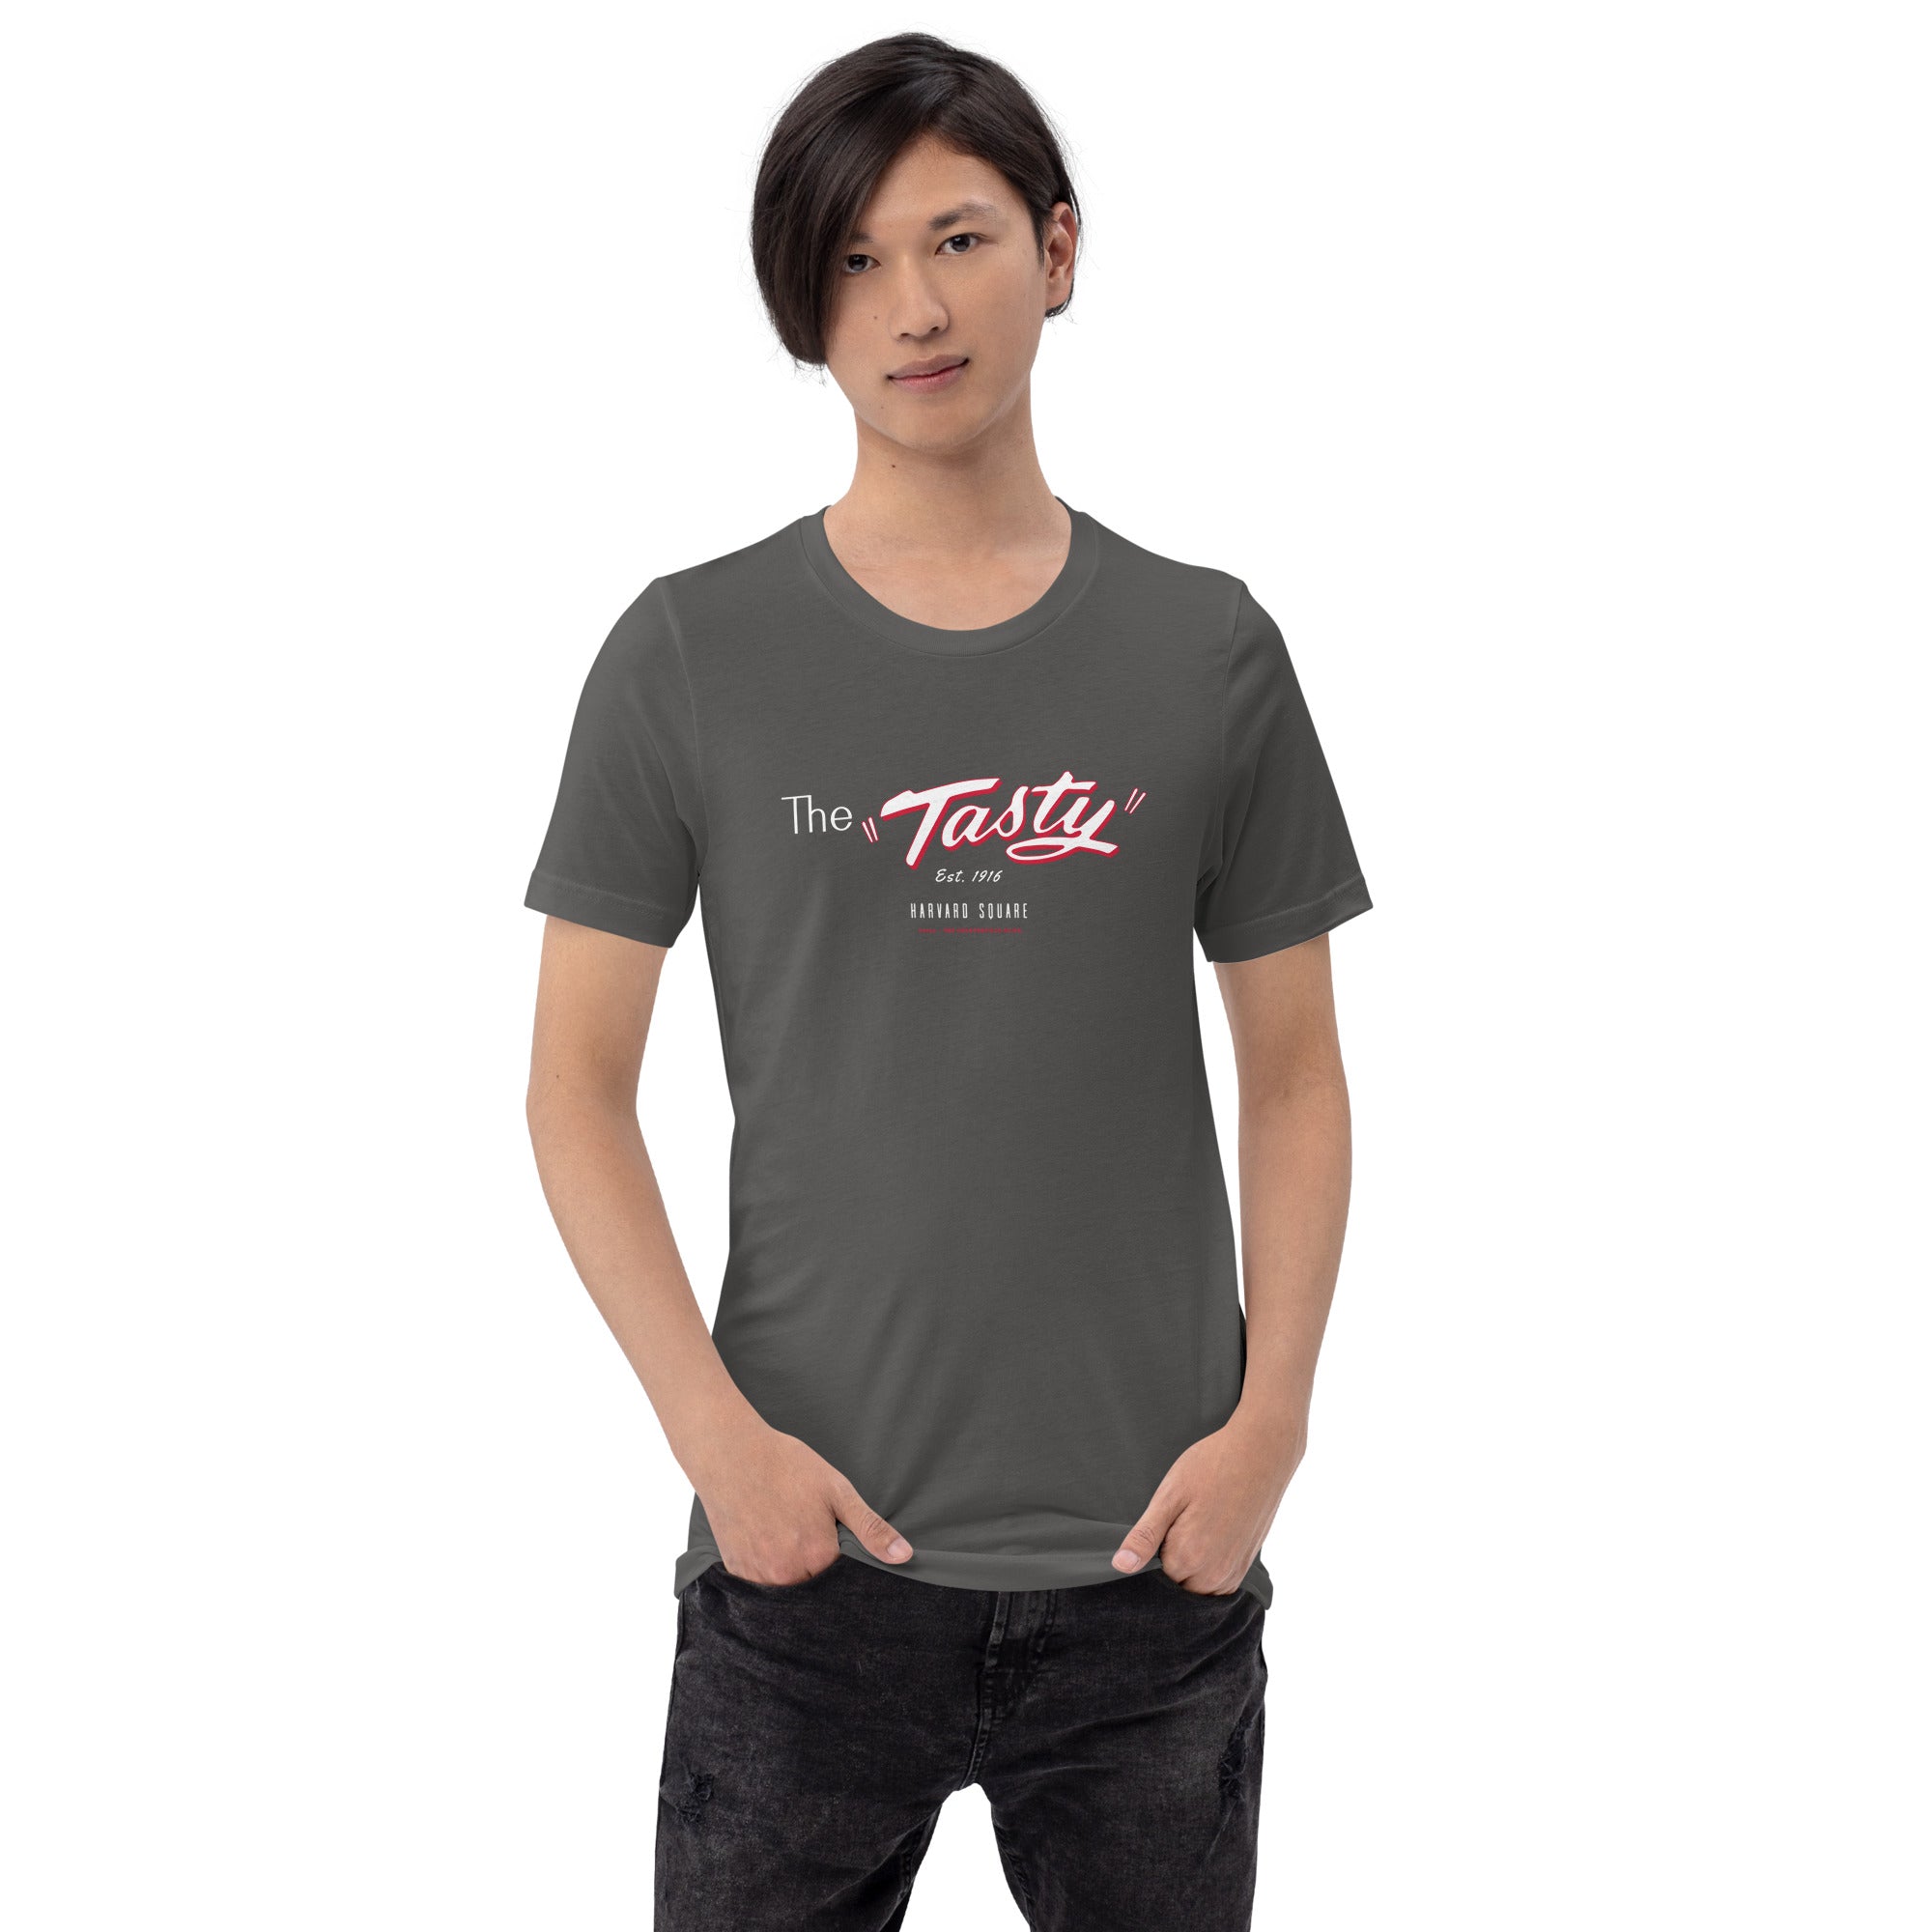 man wearing Dark grey unisex t-shirt with the iconic The Tasty design Harvard Square